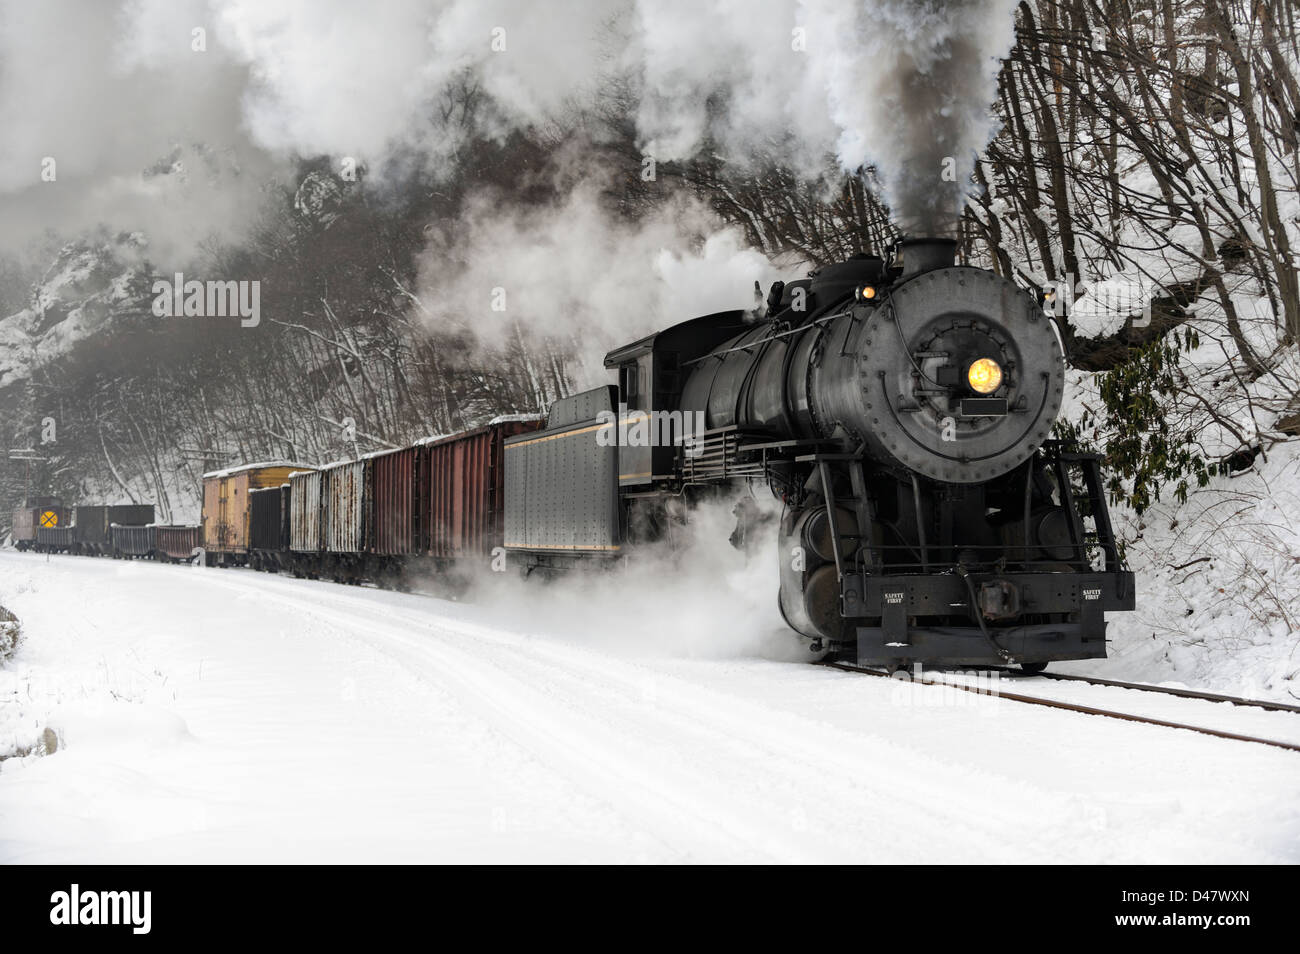 Freight train rounding a curve, through a snowy rock cut, beside a river, a steam locomotive billowing smoke in the cold winter air. Stock Photo